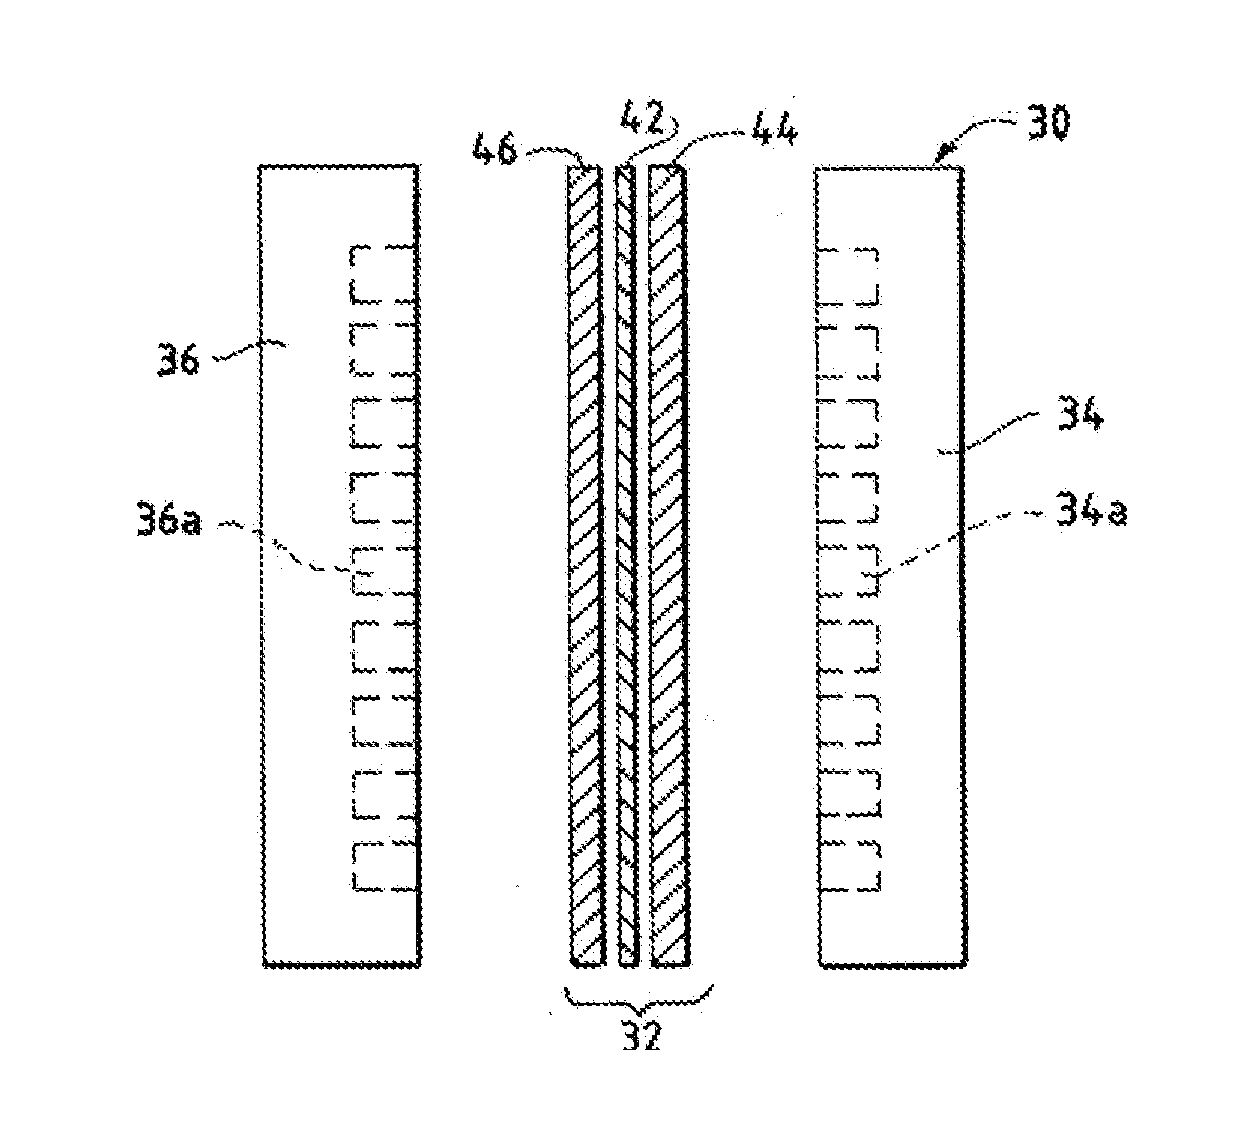 Electrochemical Device For Converting Carbon Dioxide To A Reaction Product